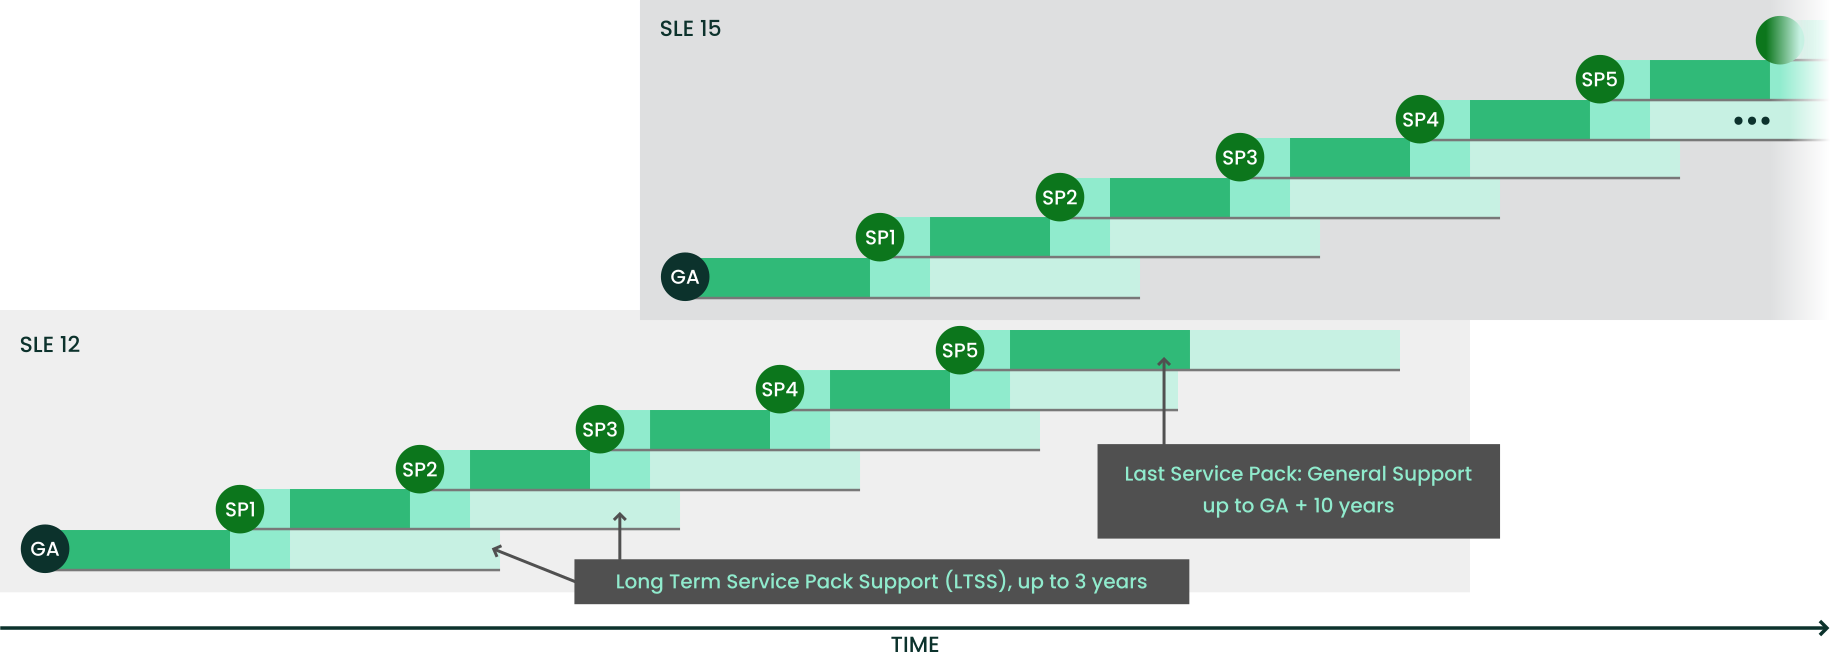 Long term service pack support